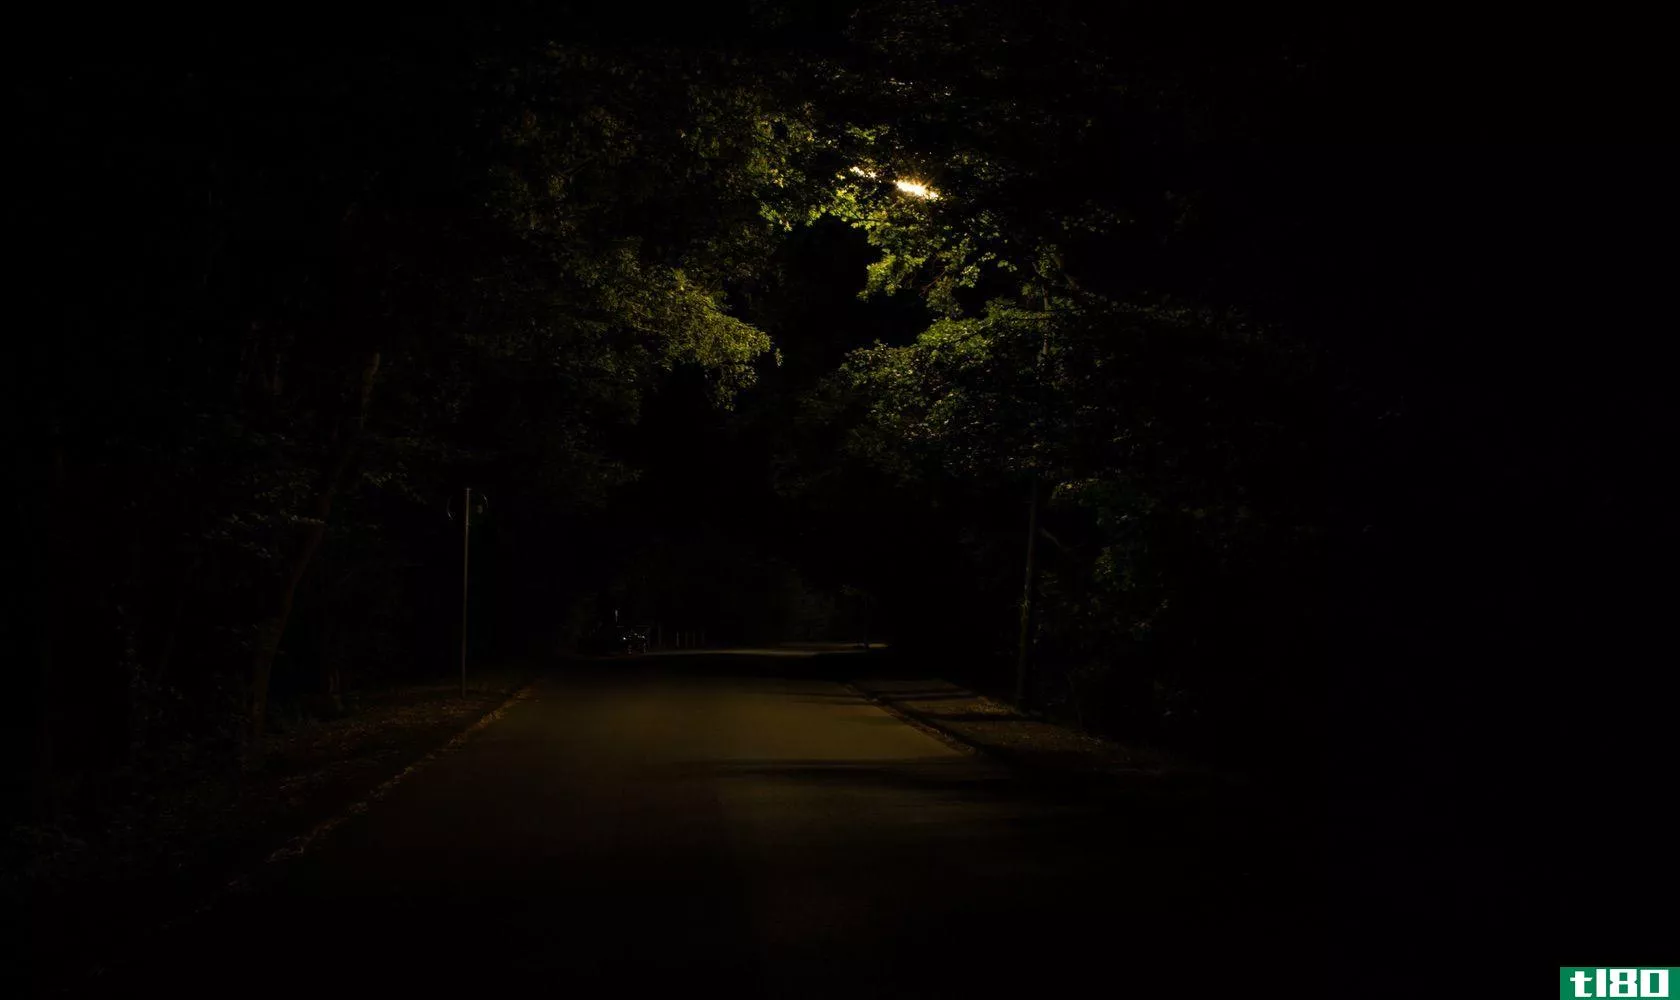 Dark road lined with trees at night